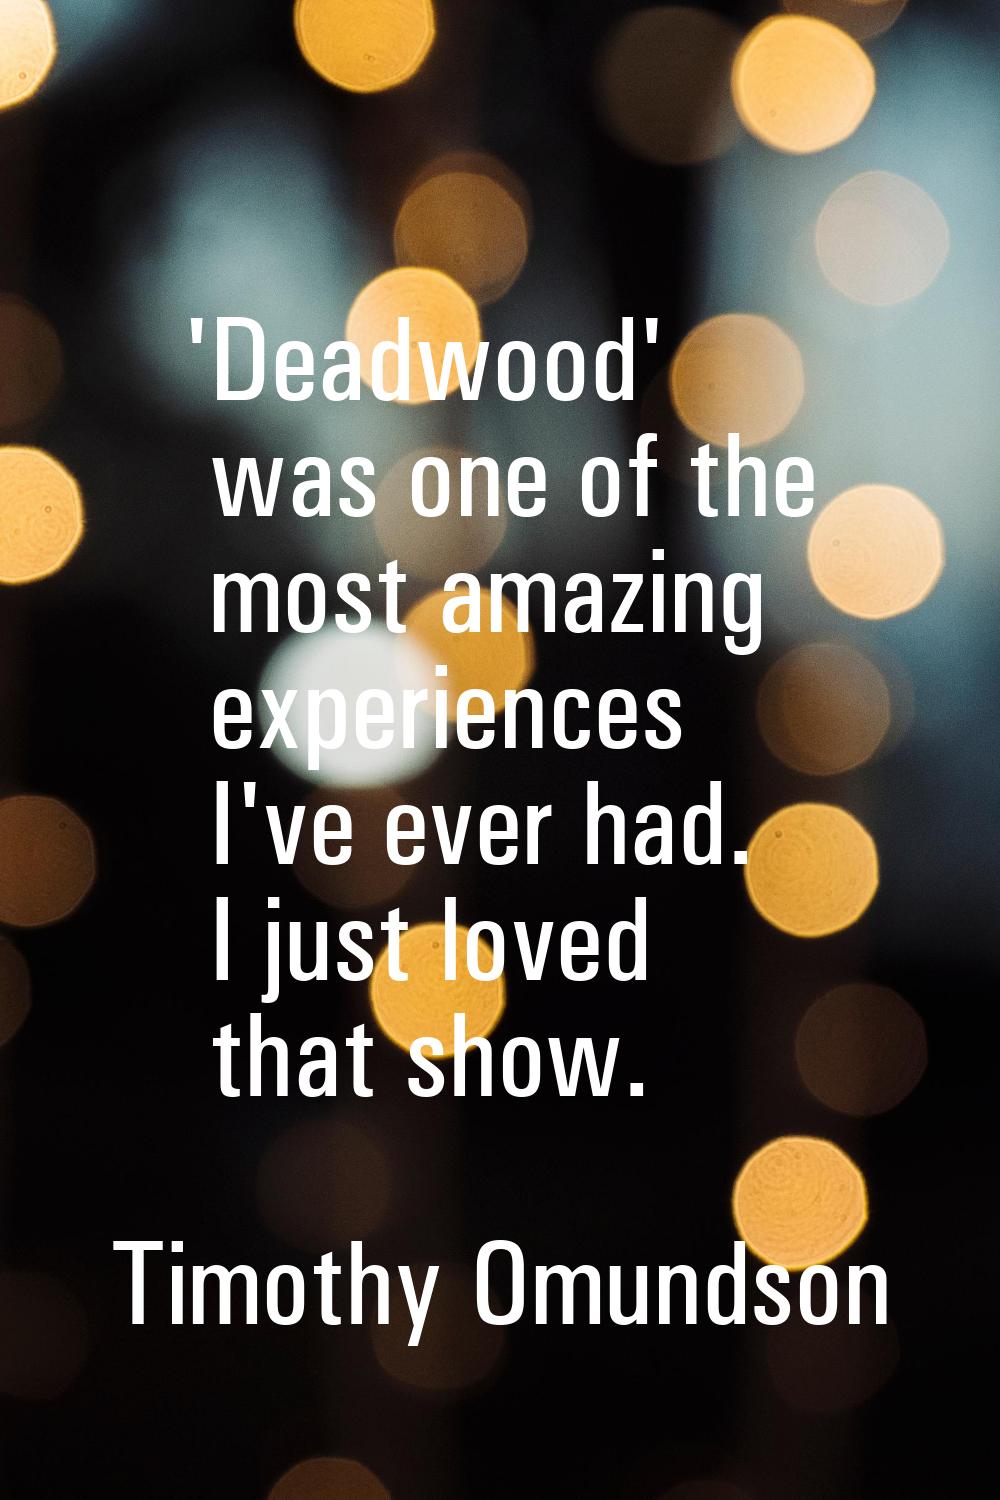 'Deadwood' was one of the most amazing experiences I've ever had. I just loved that show.